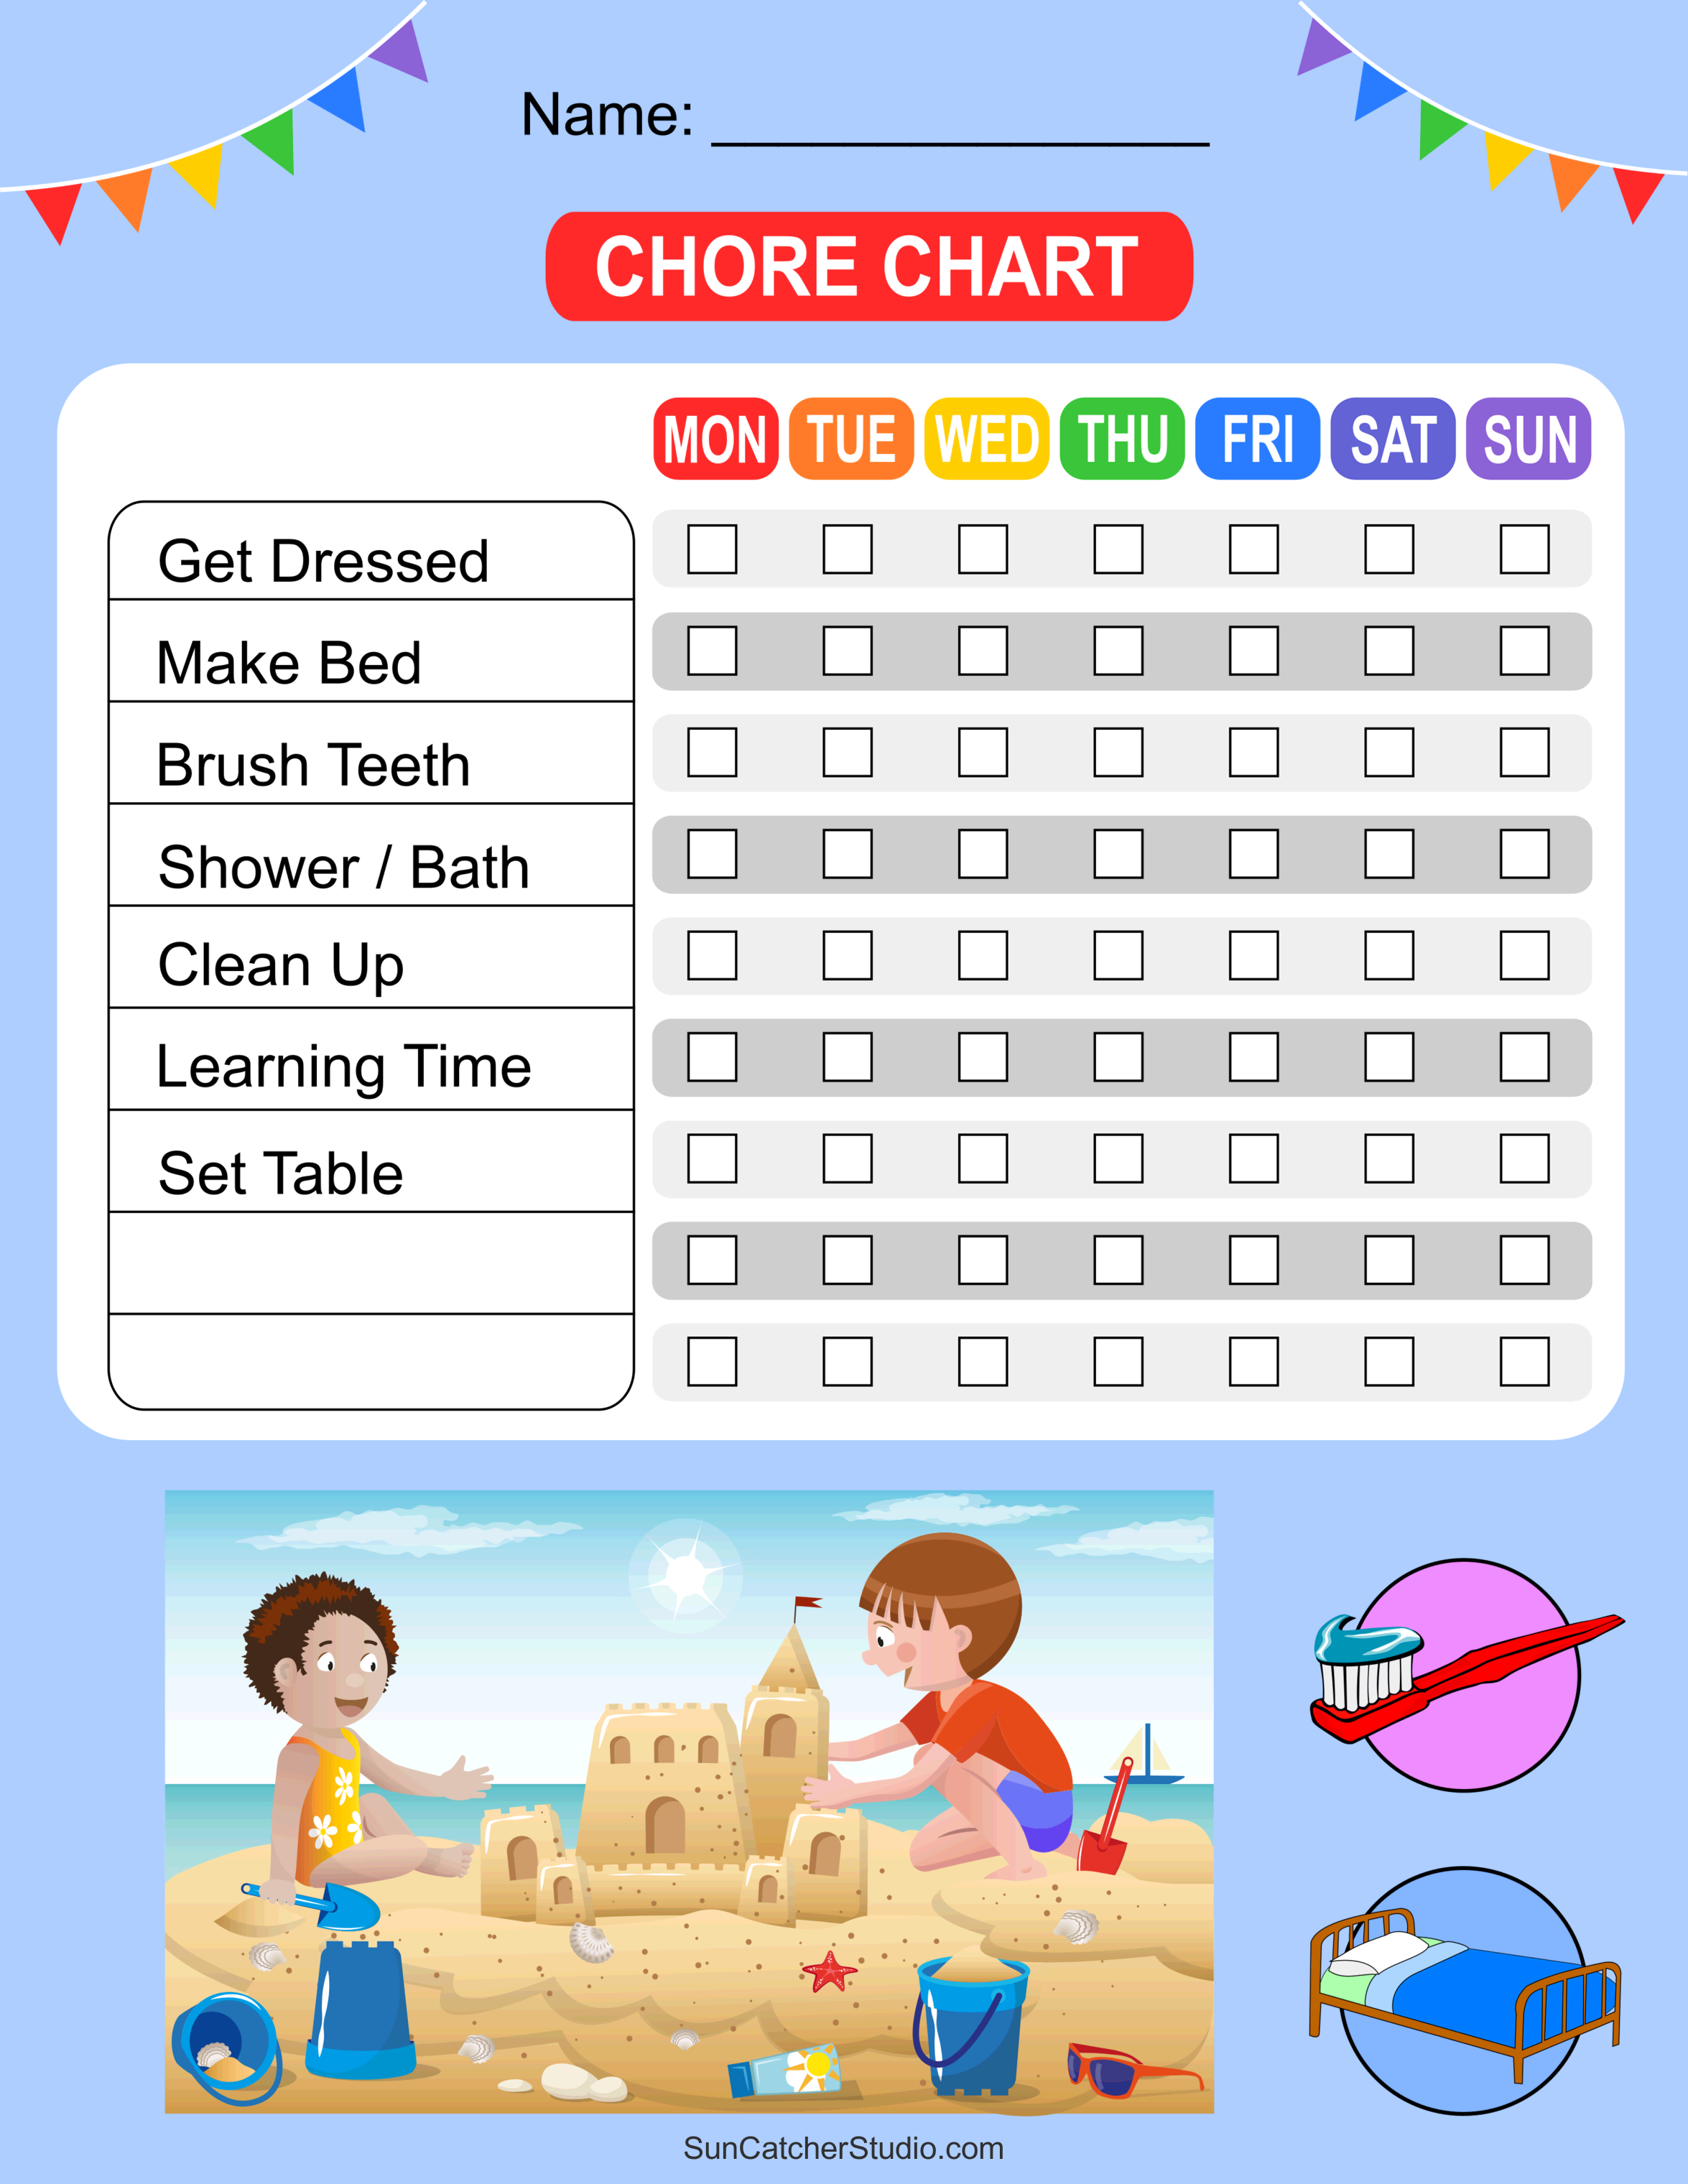 This chore chart cuts down on arguing over chores!  Kids chore chart  printable, Chore chart template, Free printable chore charts